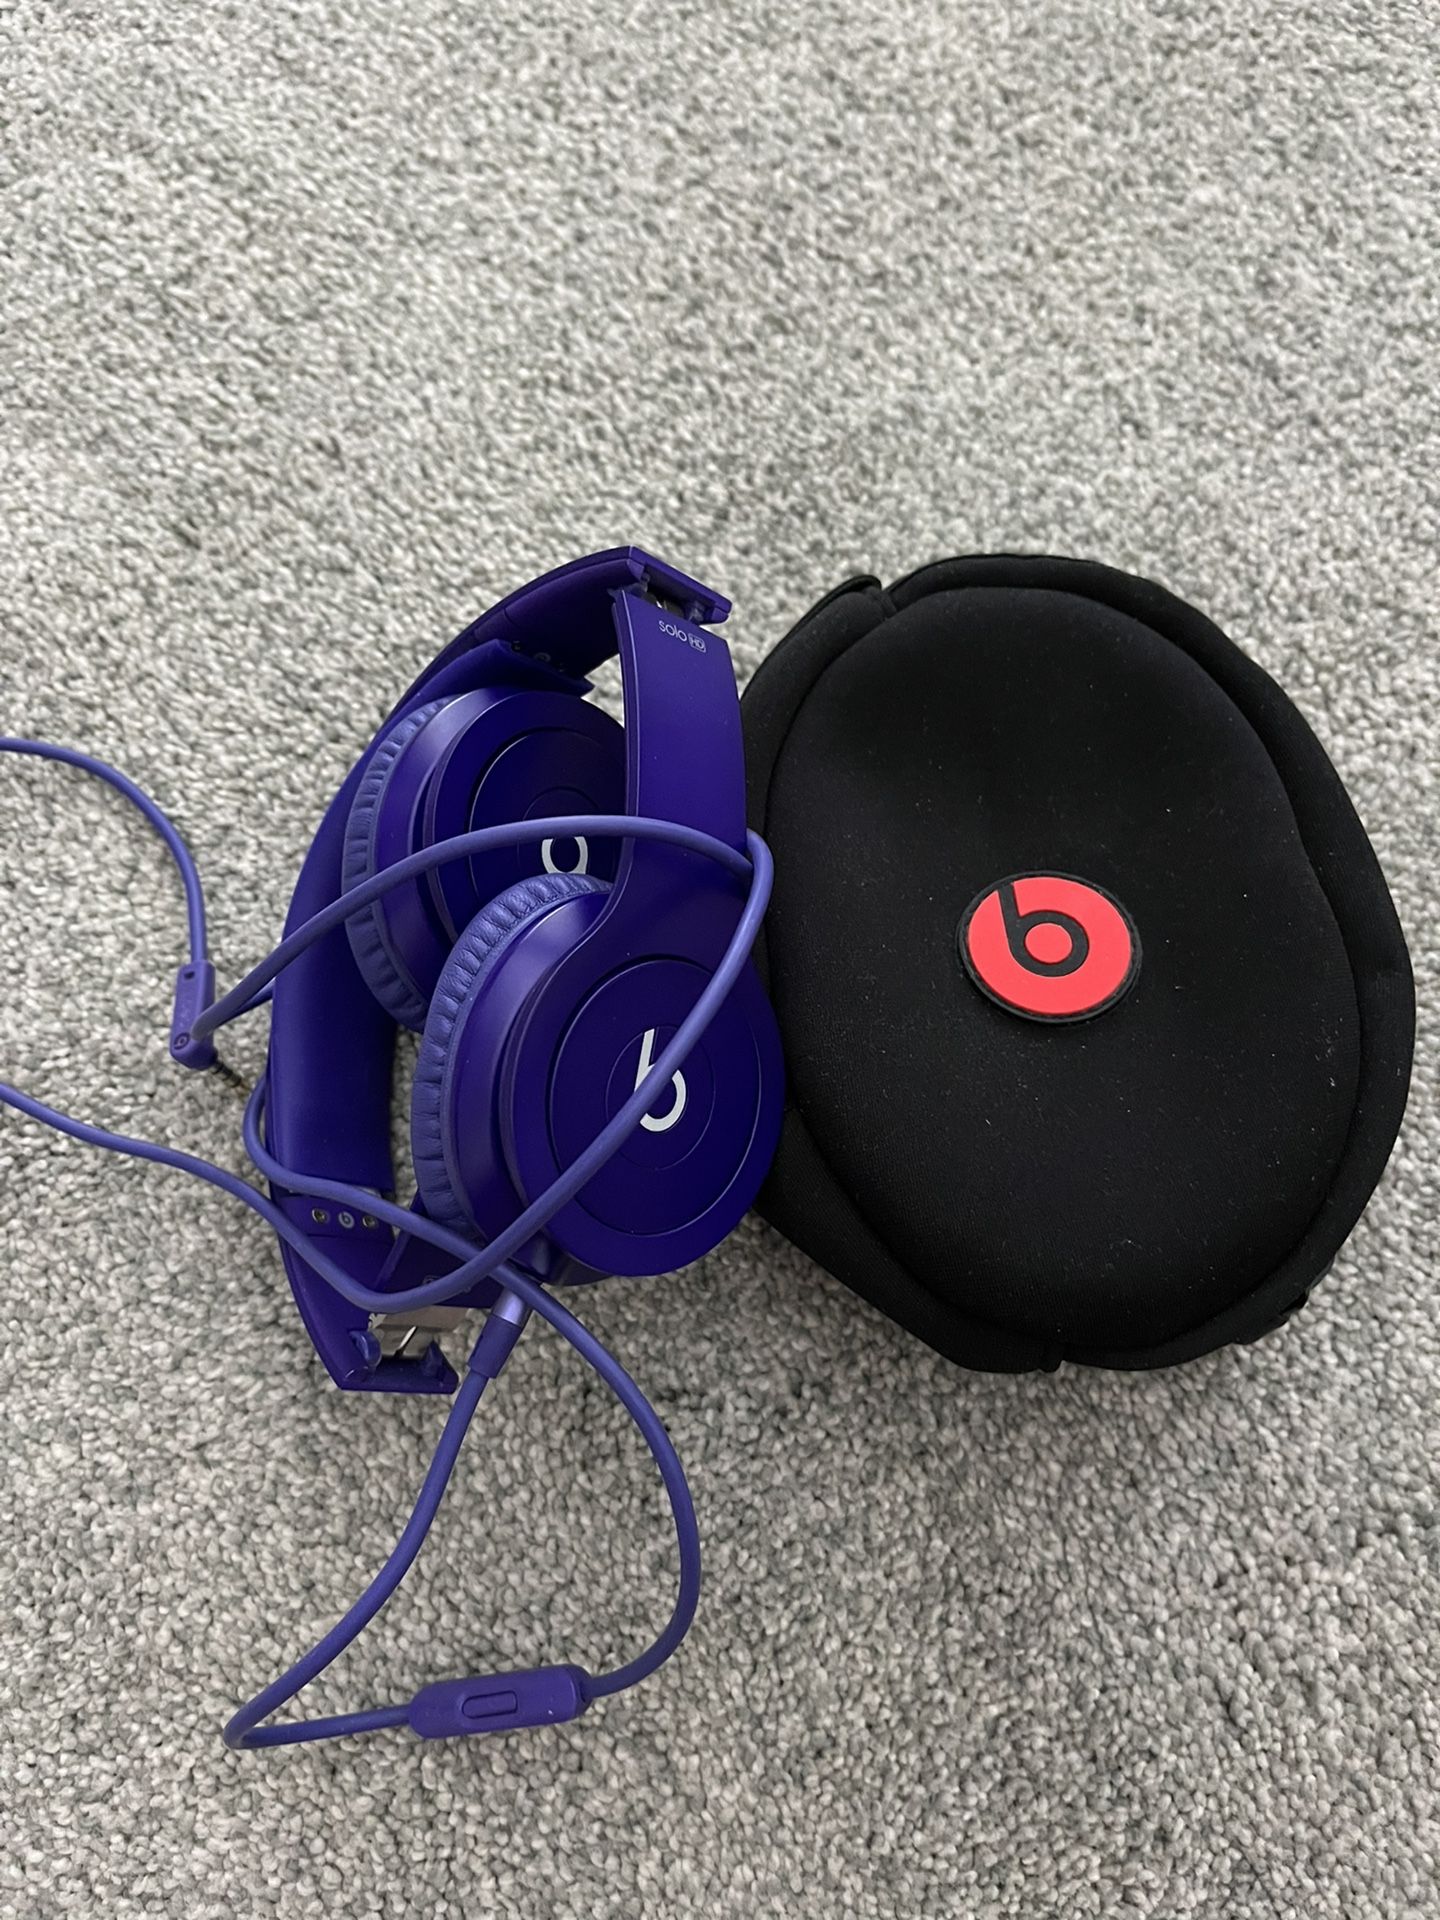 LIKE NEW BEATS SOLO HD OVER-THE-EAR PURPLE HEADPHONES WITH VOLUME CONTROL & CASE